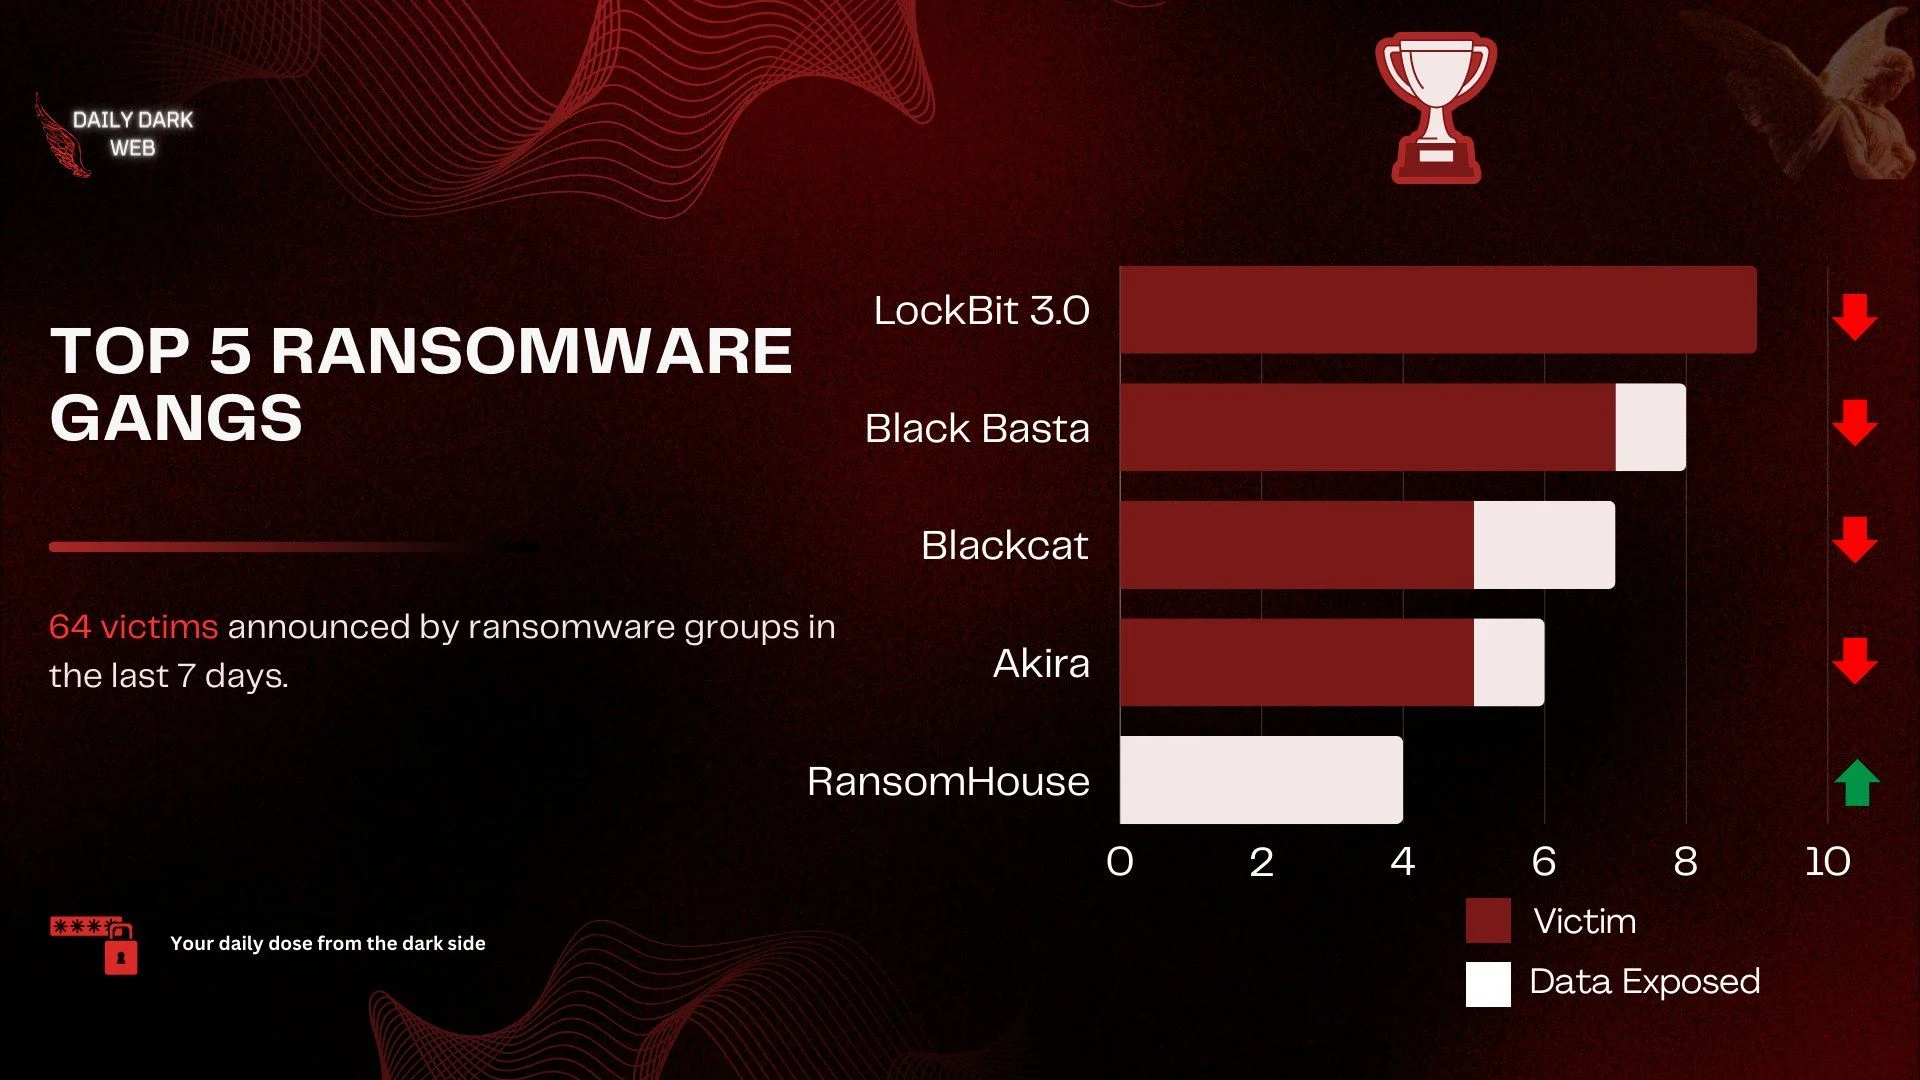 Top 5 Ransomware Gangs on February 27